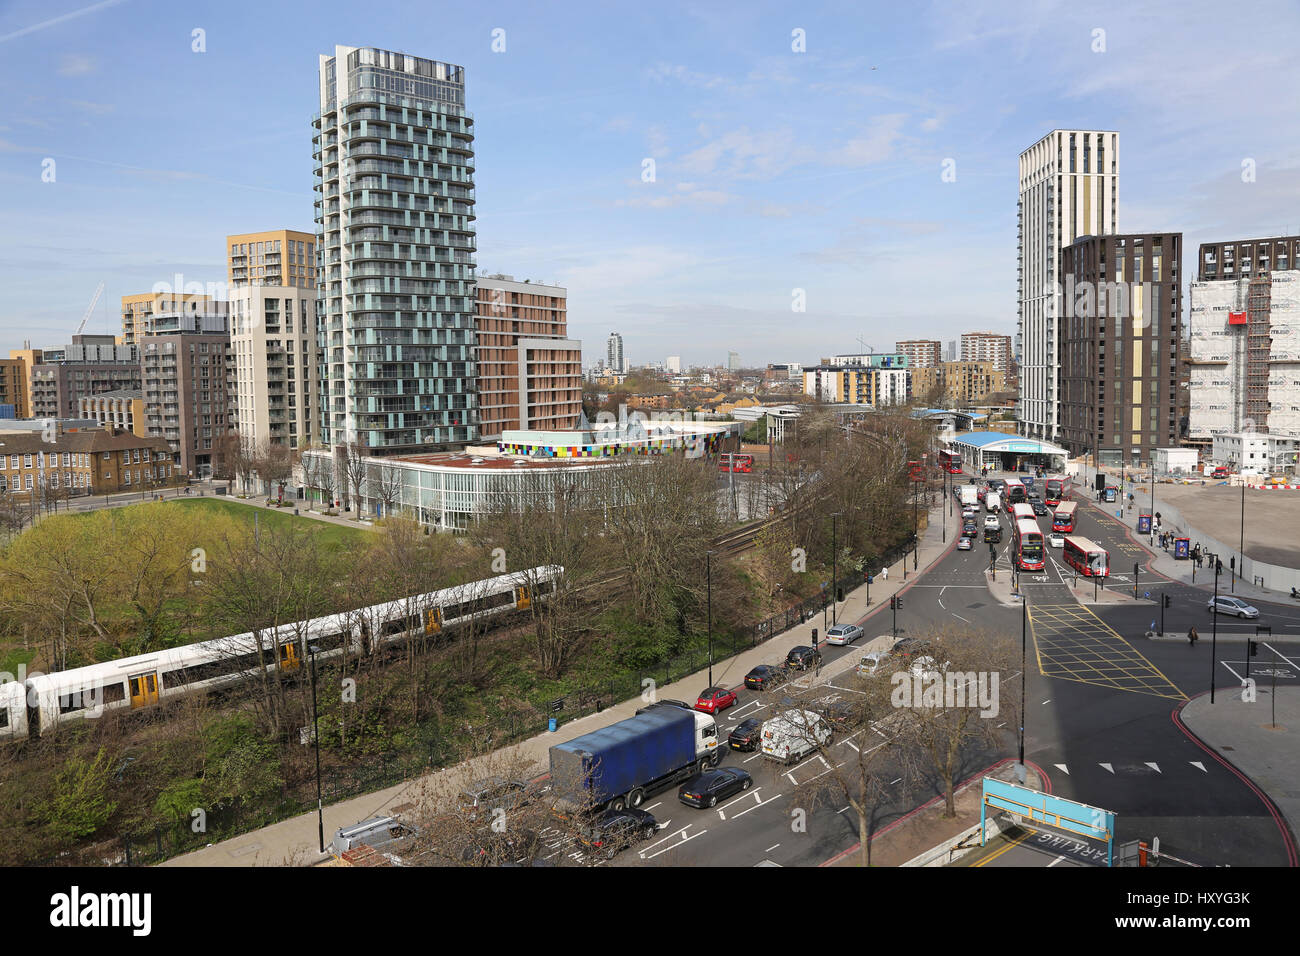 High level view of Lewisham town centre, southeast London, UK, showing new residential development, sports centre, railway and new road layout. Stock Photo